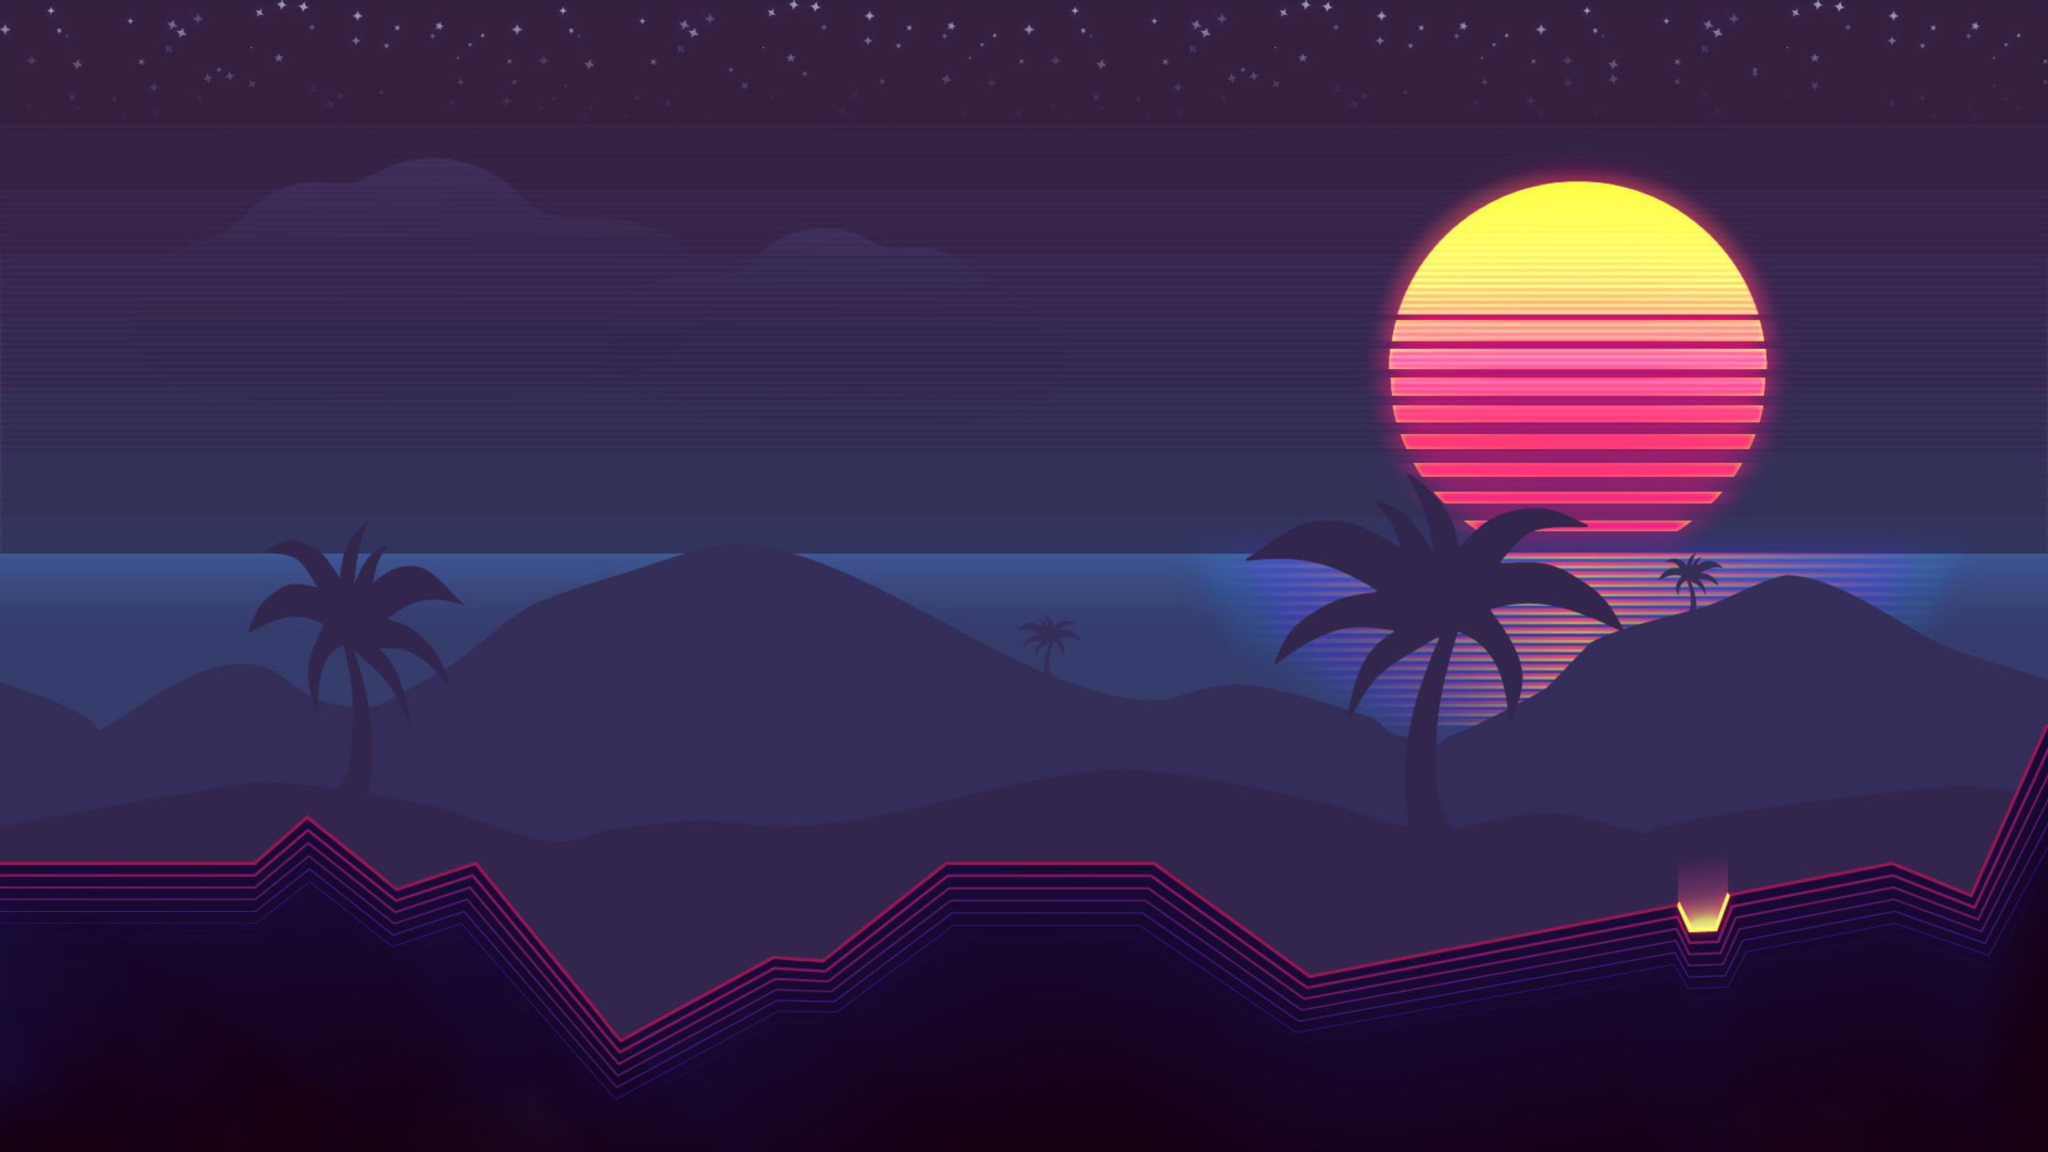 48x1152 Synthwave 4k 48x1152 Resolution Wallpaper Hd Artist 4k Wallpapers Images Photos And Background